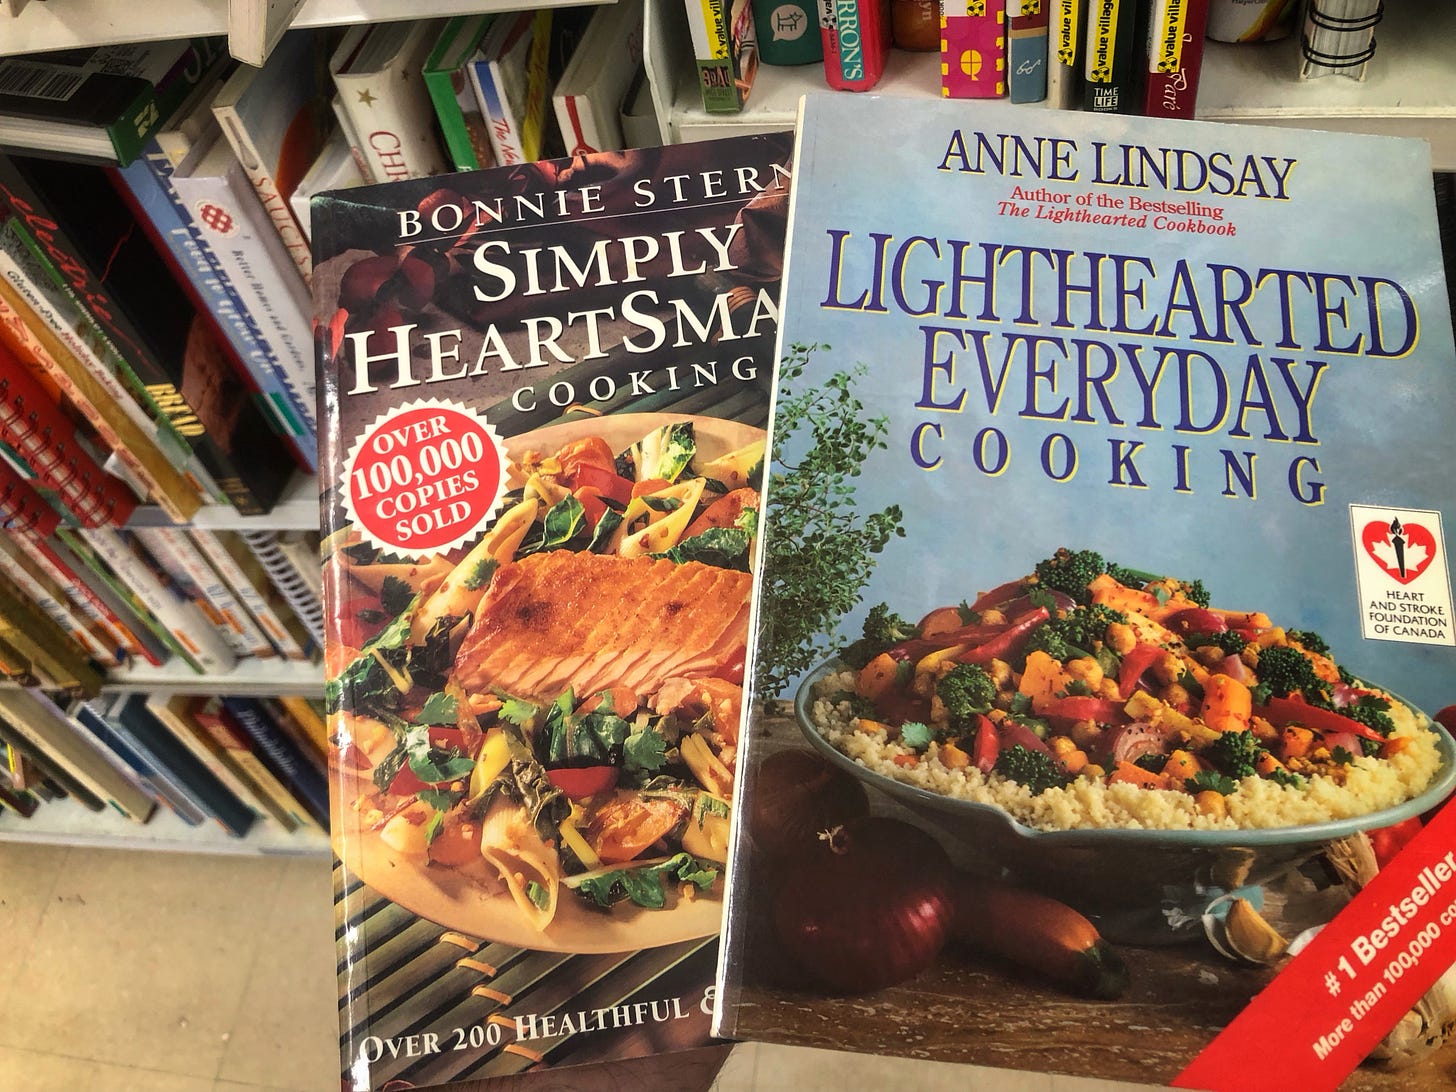 Copies of "Simply HeartSmart Cooking" by Bonnie Stern and "Lighthearted Everyday Cooking," by Anne Lindsay held up in front of some thrift store bookshelves